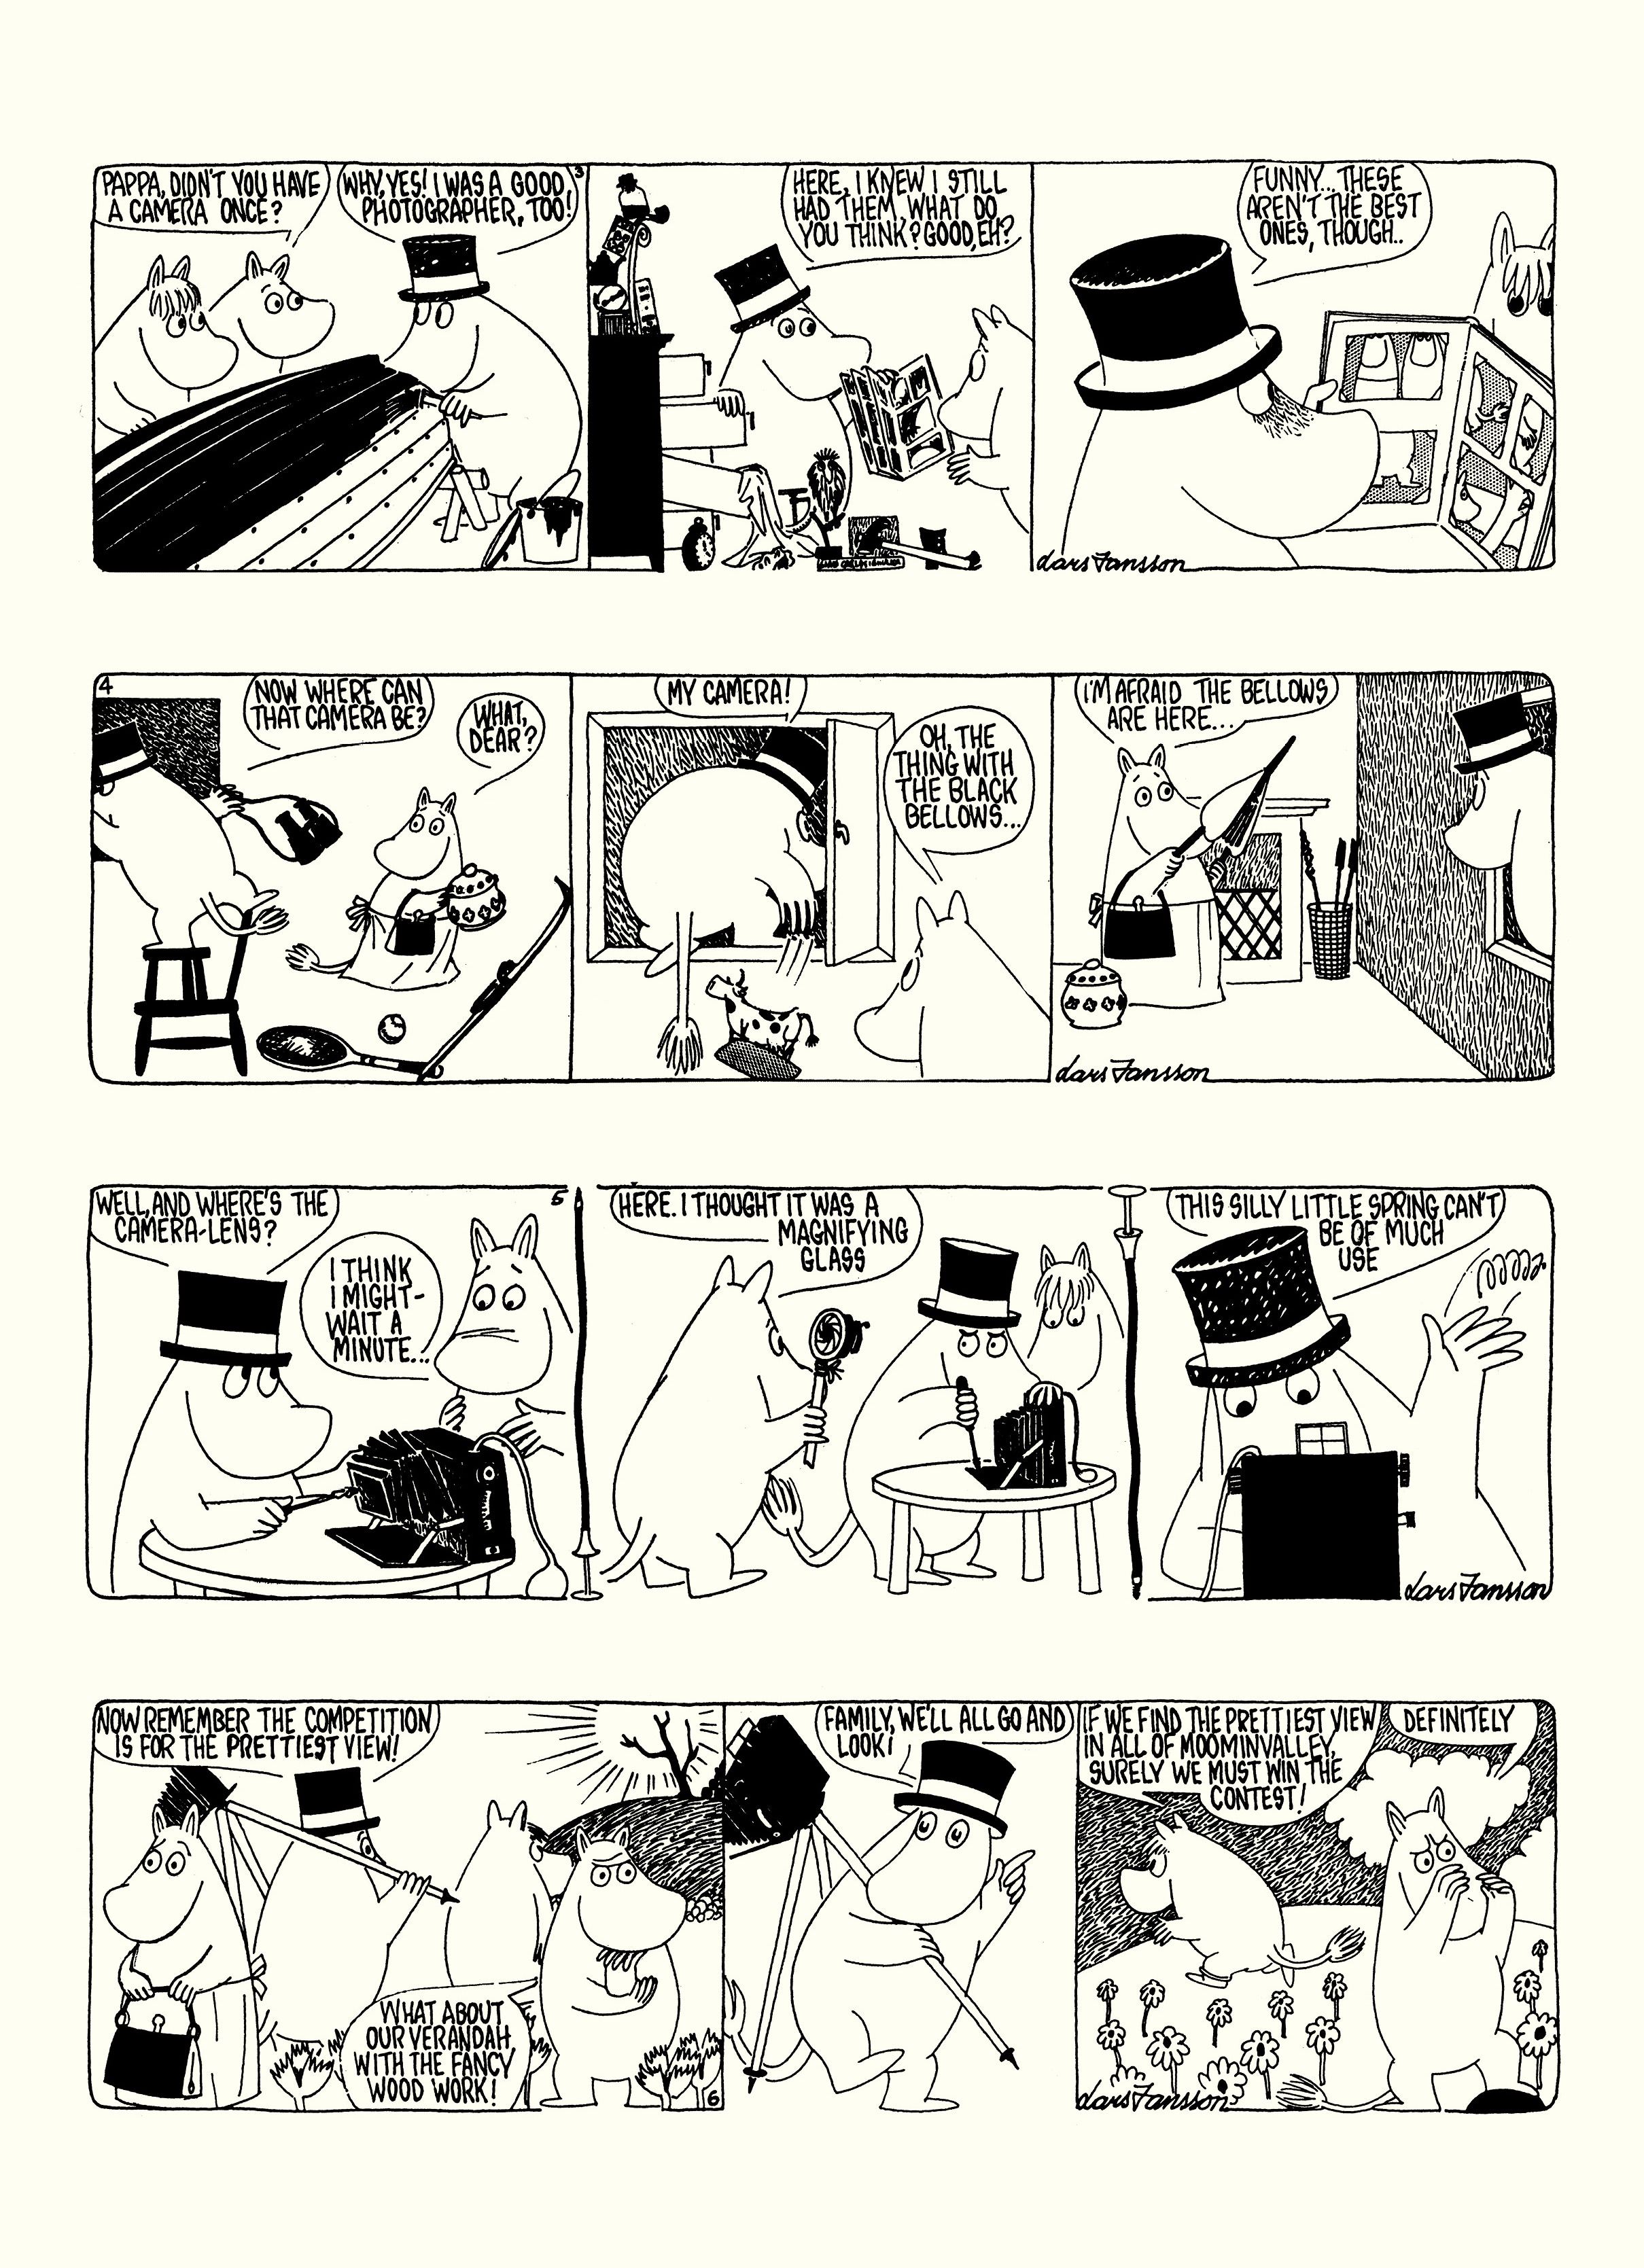 Read online Moomin: The Complete Lars Jansson Comic Strip comic -  Issue # TPB 8 - 28